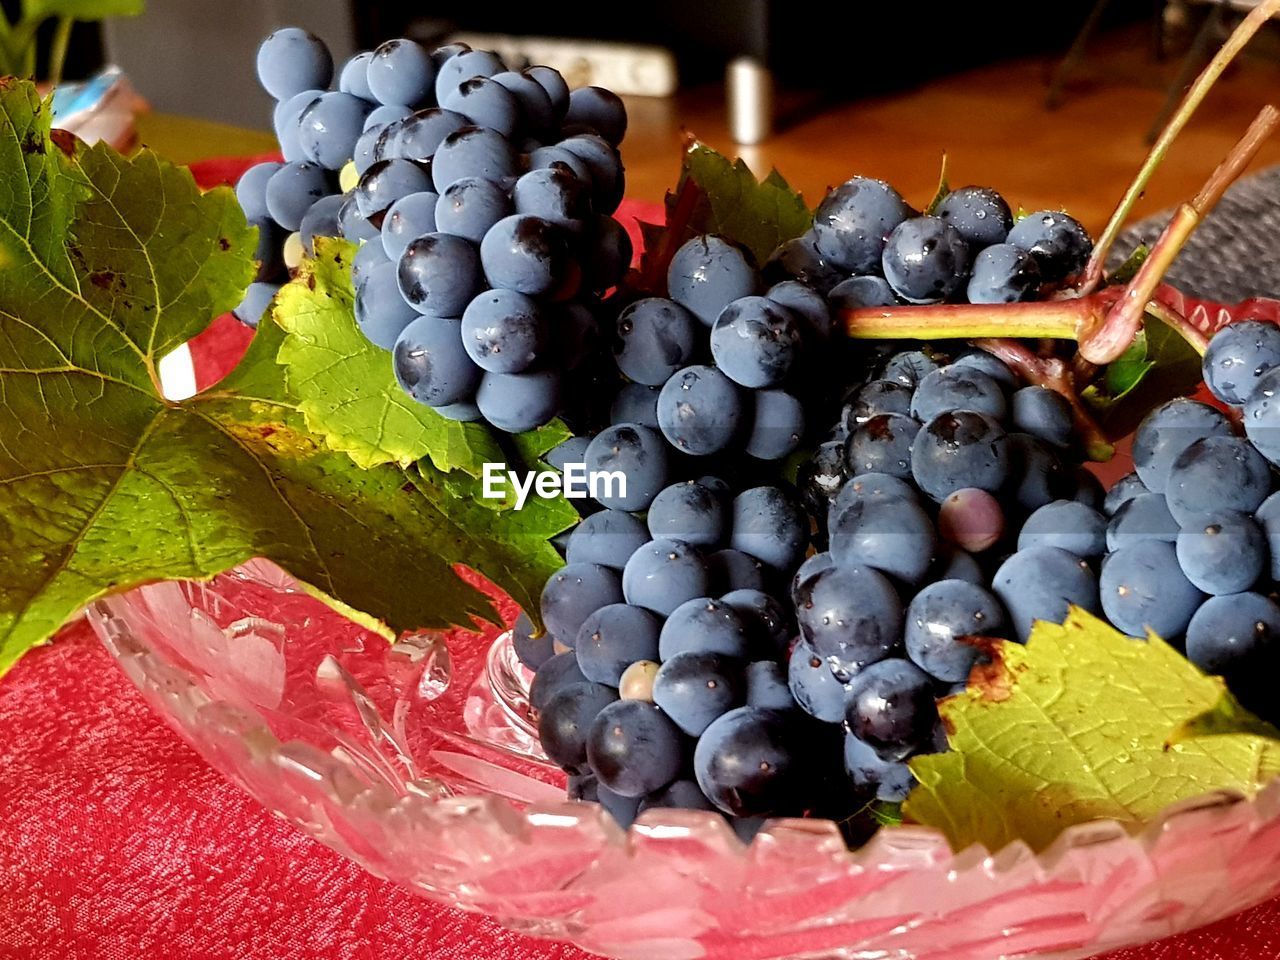 High angle view of grapes